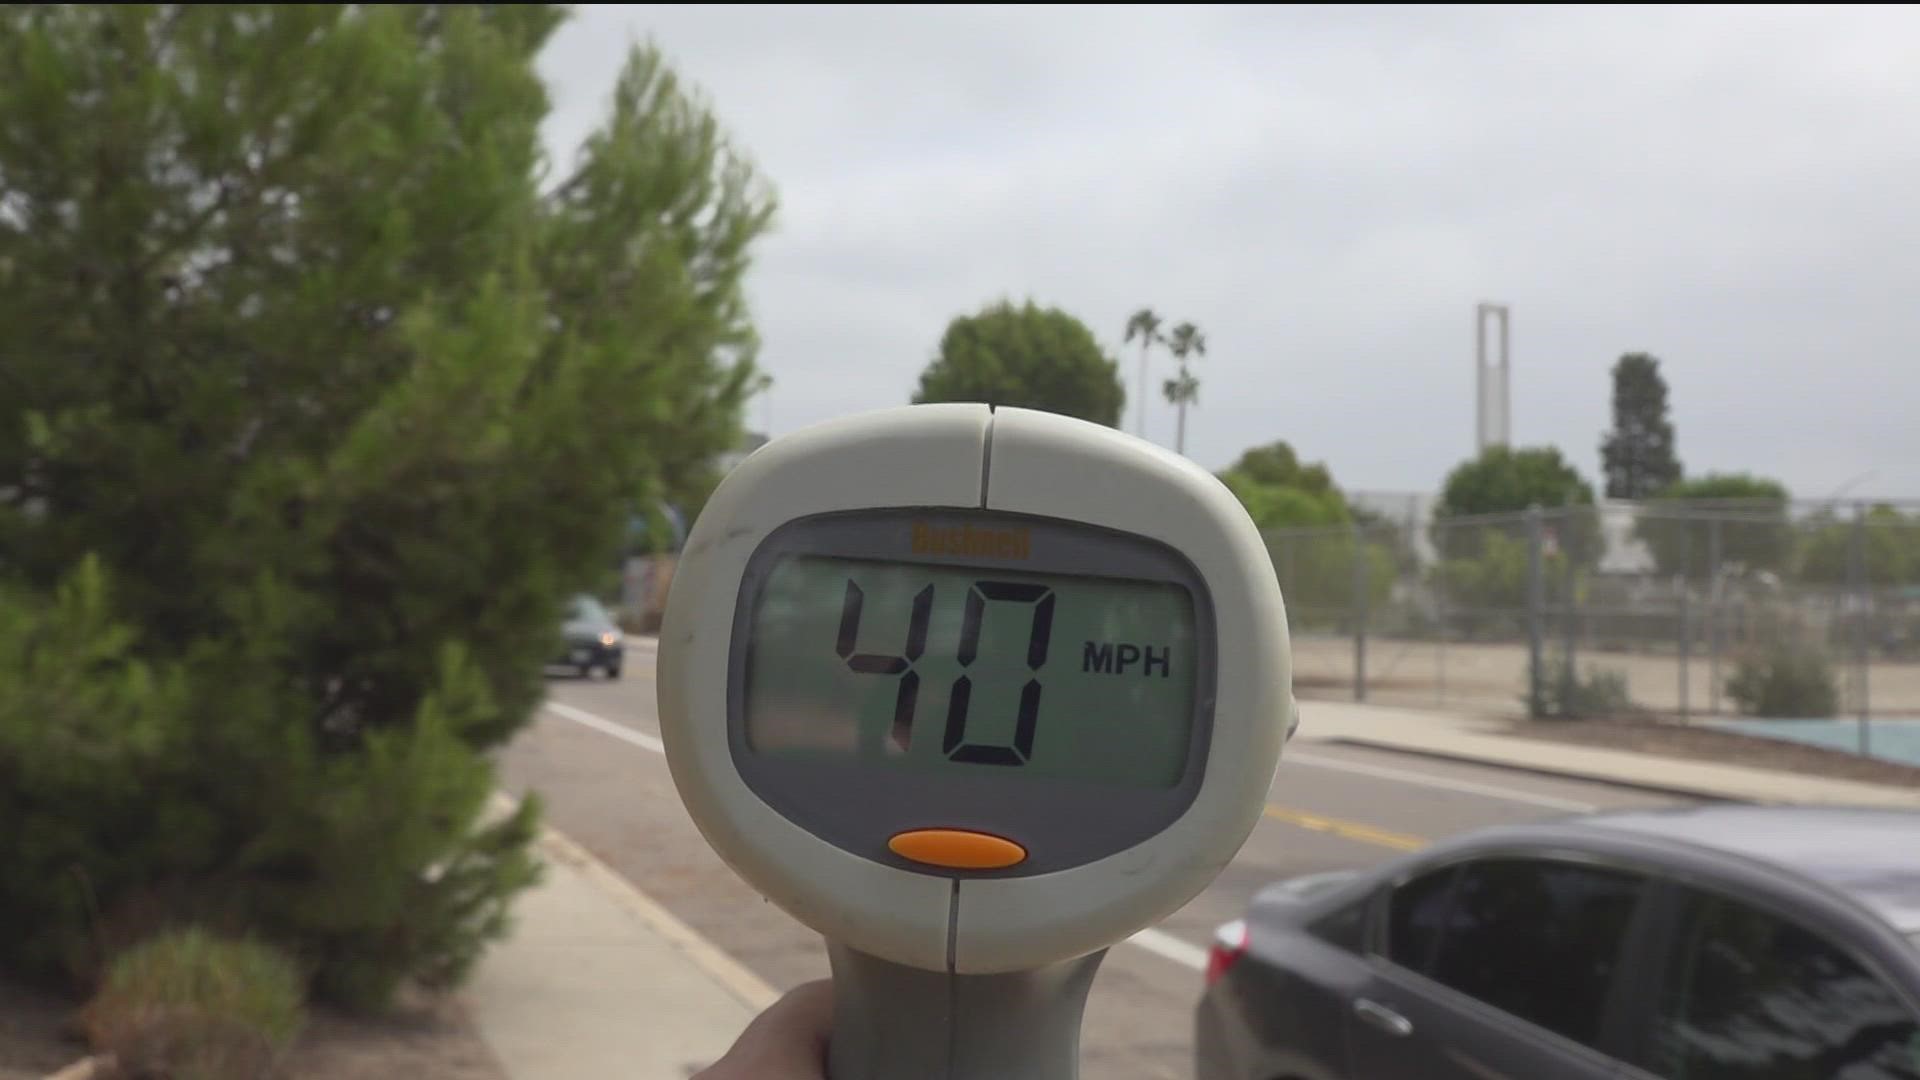 CBS 8 is Working For You to see what traffic calming measures will work to slow down cars going faster than the 25 mph speed limit on Turquoise Street.